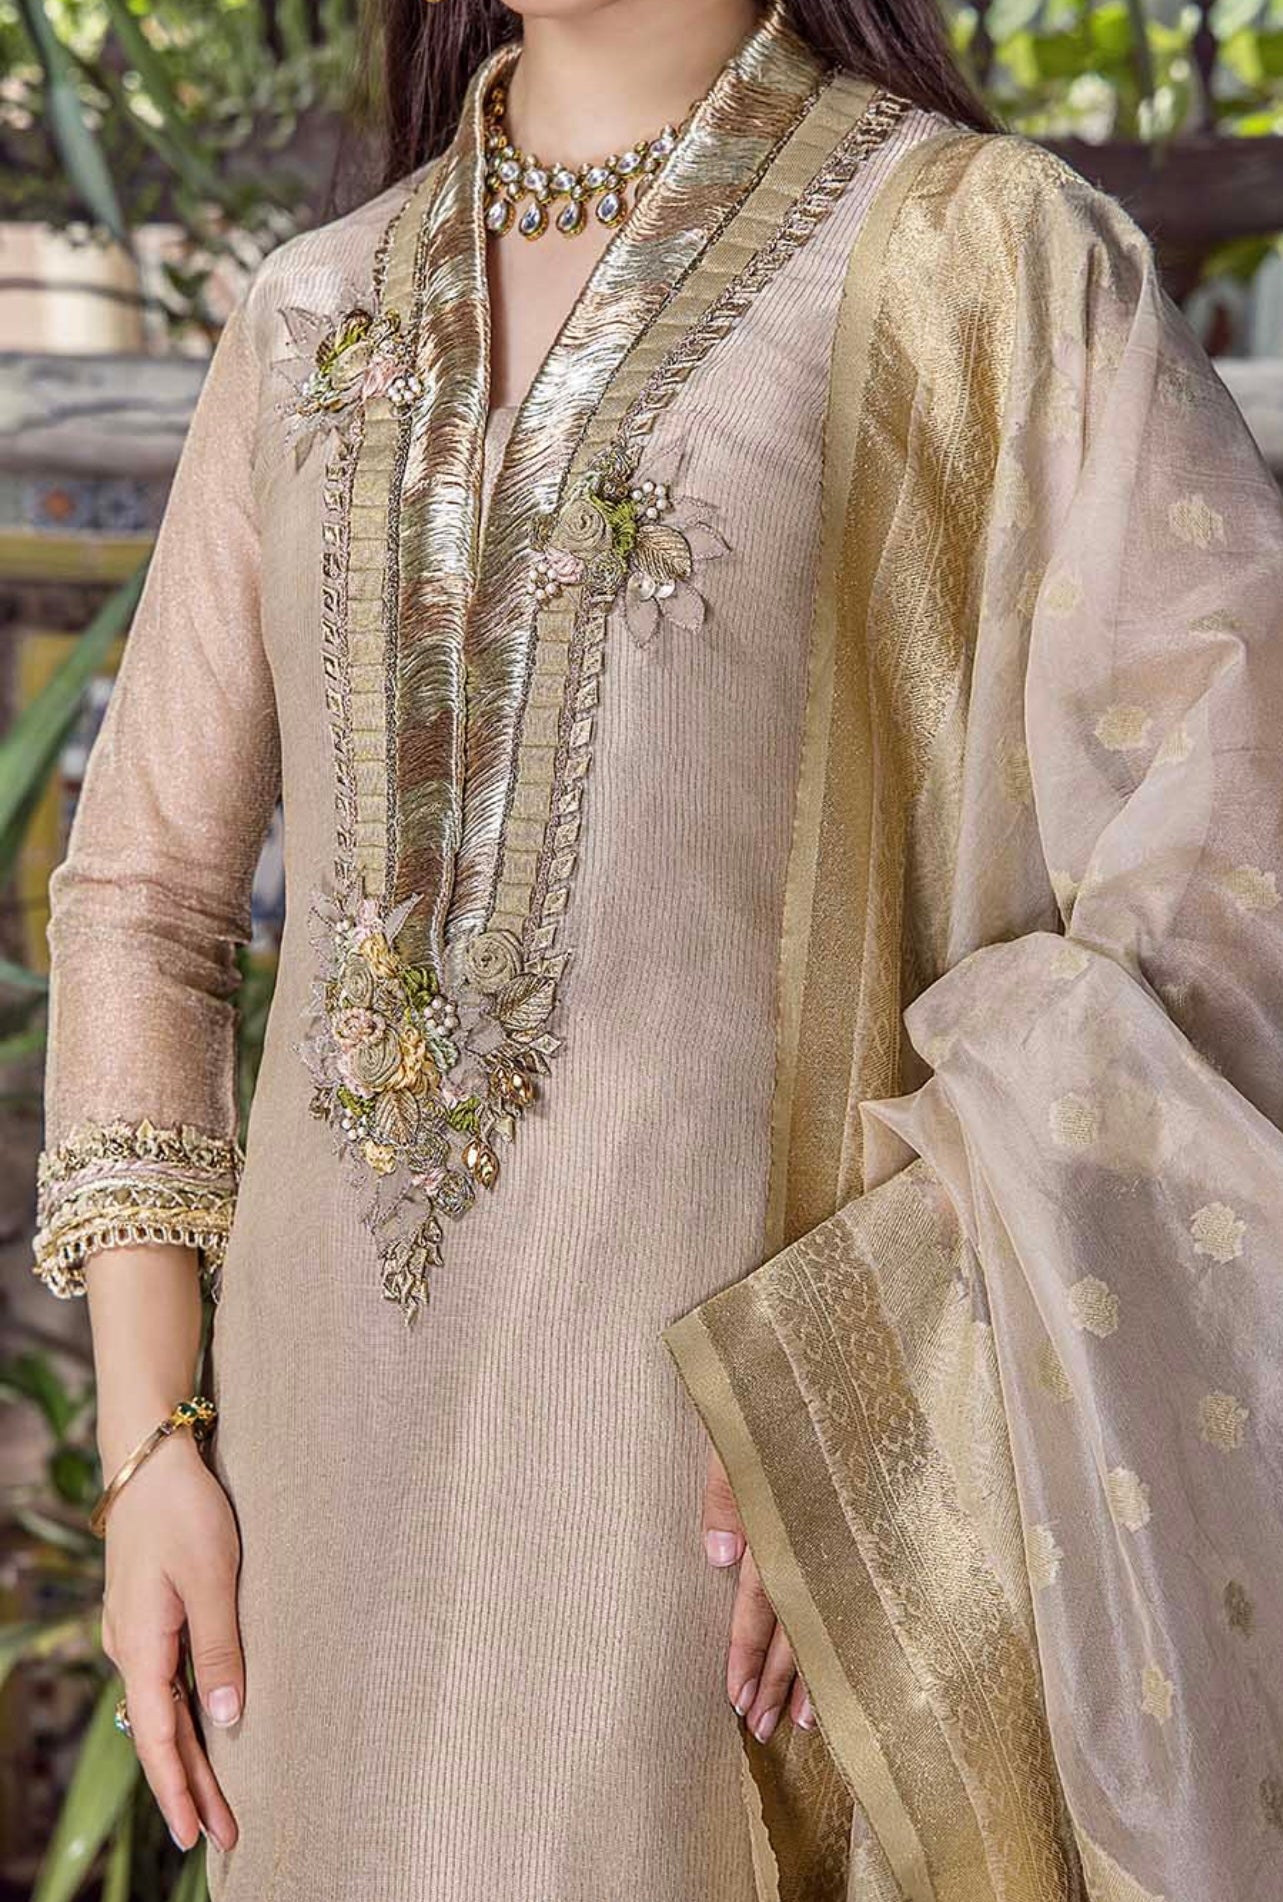 KHUDA BAKSH CREATIONS EMBROIDERED 3PC READYMADE - M-101